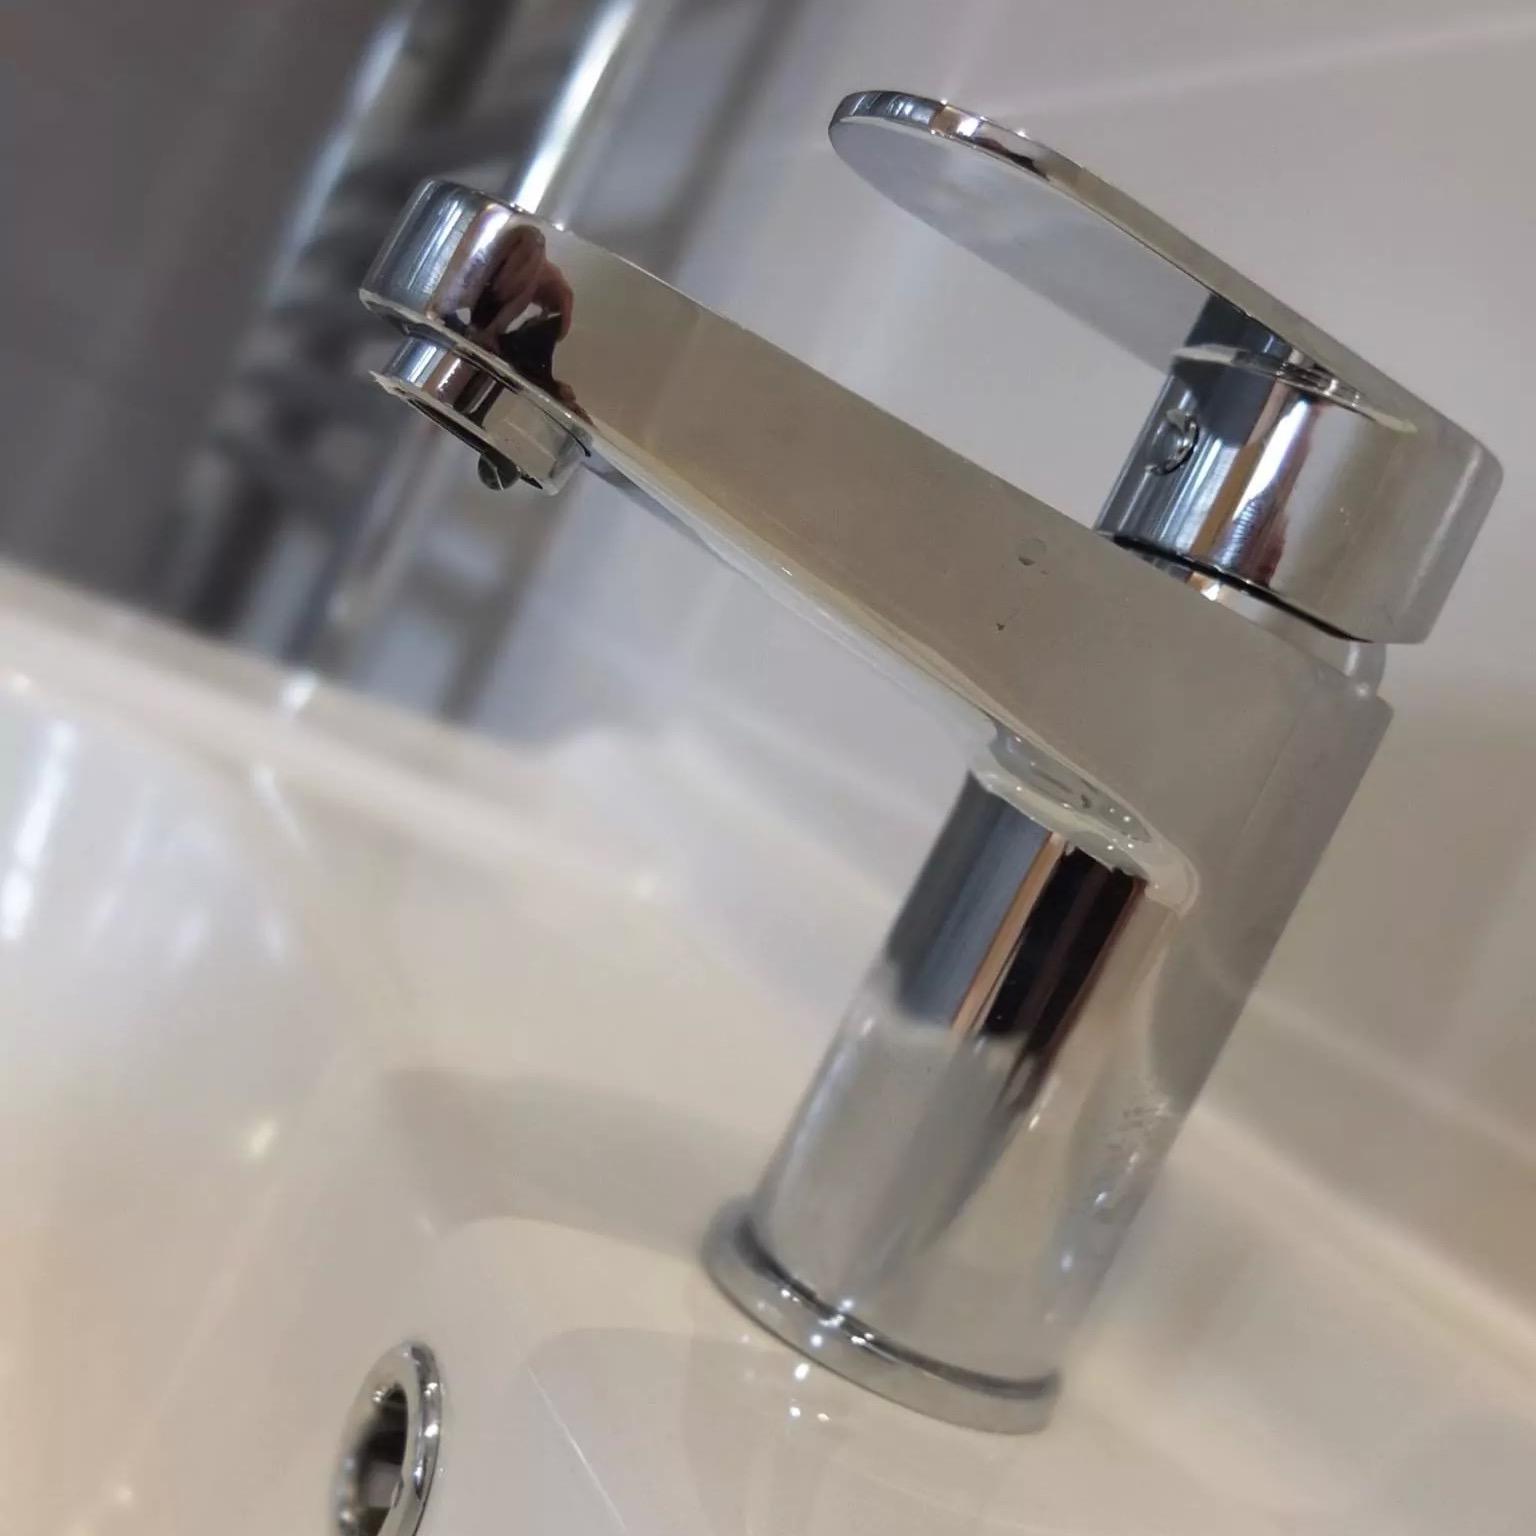 Bathroom & Kitchen re-fits, small plumbing jobs, property maintenance,  We offer a friendly & reliable service across Chester, Wirral, Liverpool & Wrexham